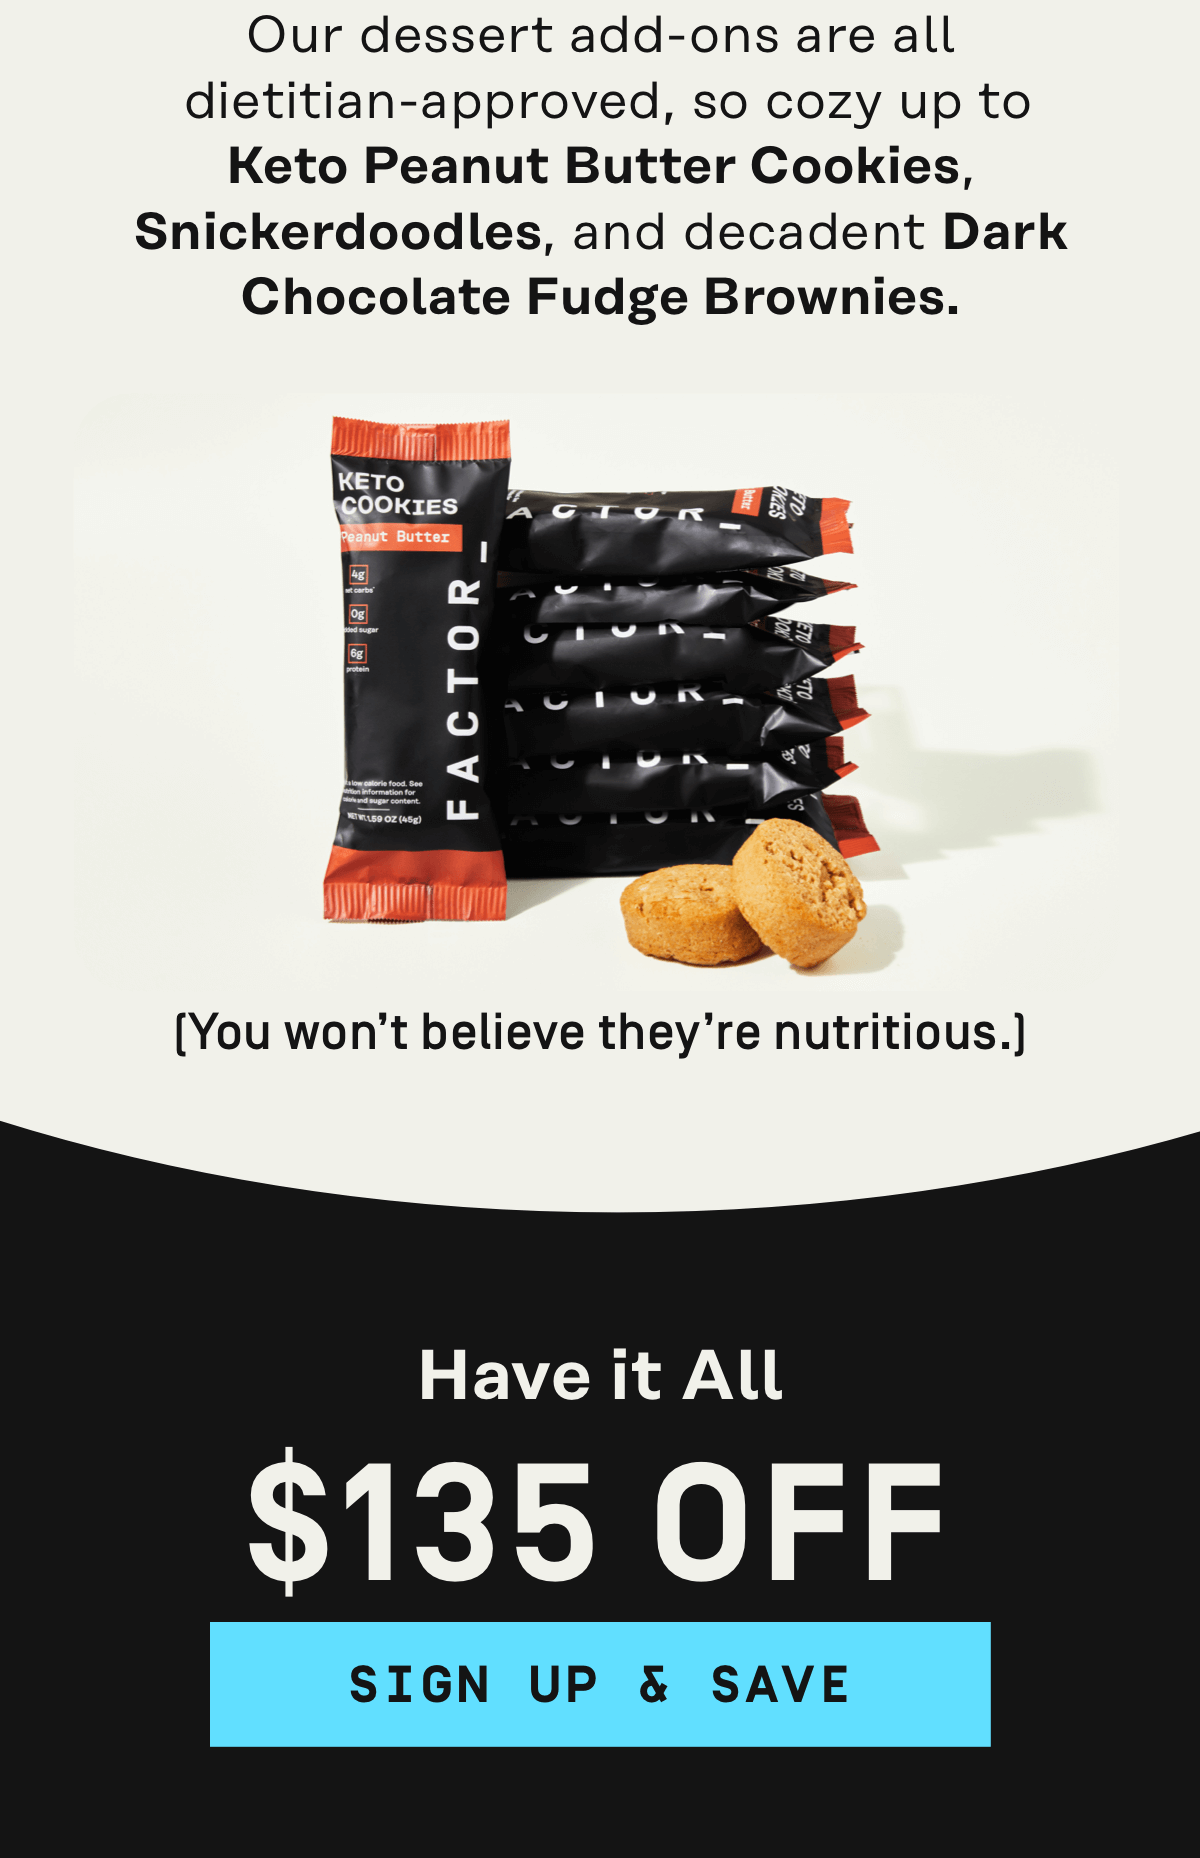 Guilt free sweets like Keto Peanut Butter Cookies, Snickerdoodles and decadent Dark Chocolate Fudge Brownies Get $135 OFF | Sign Up & Save - Get $135 OFF | Sign Up & Save